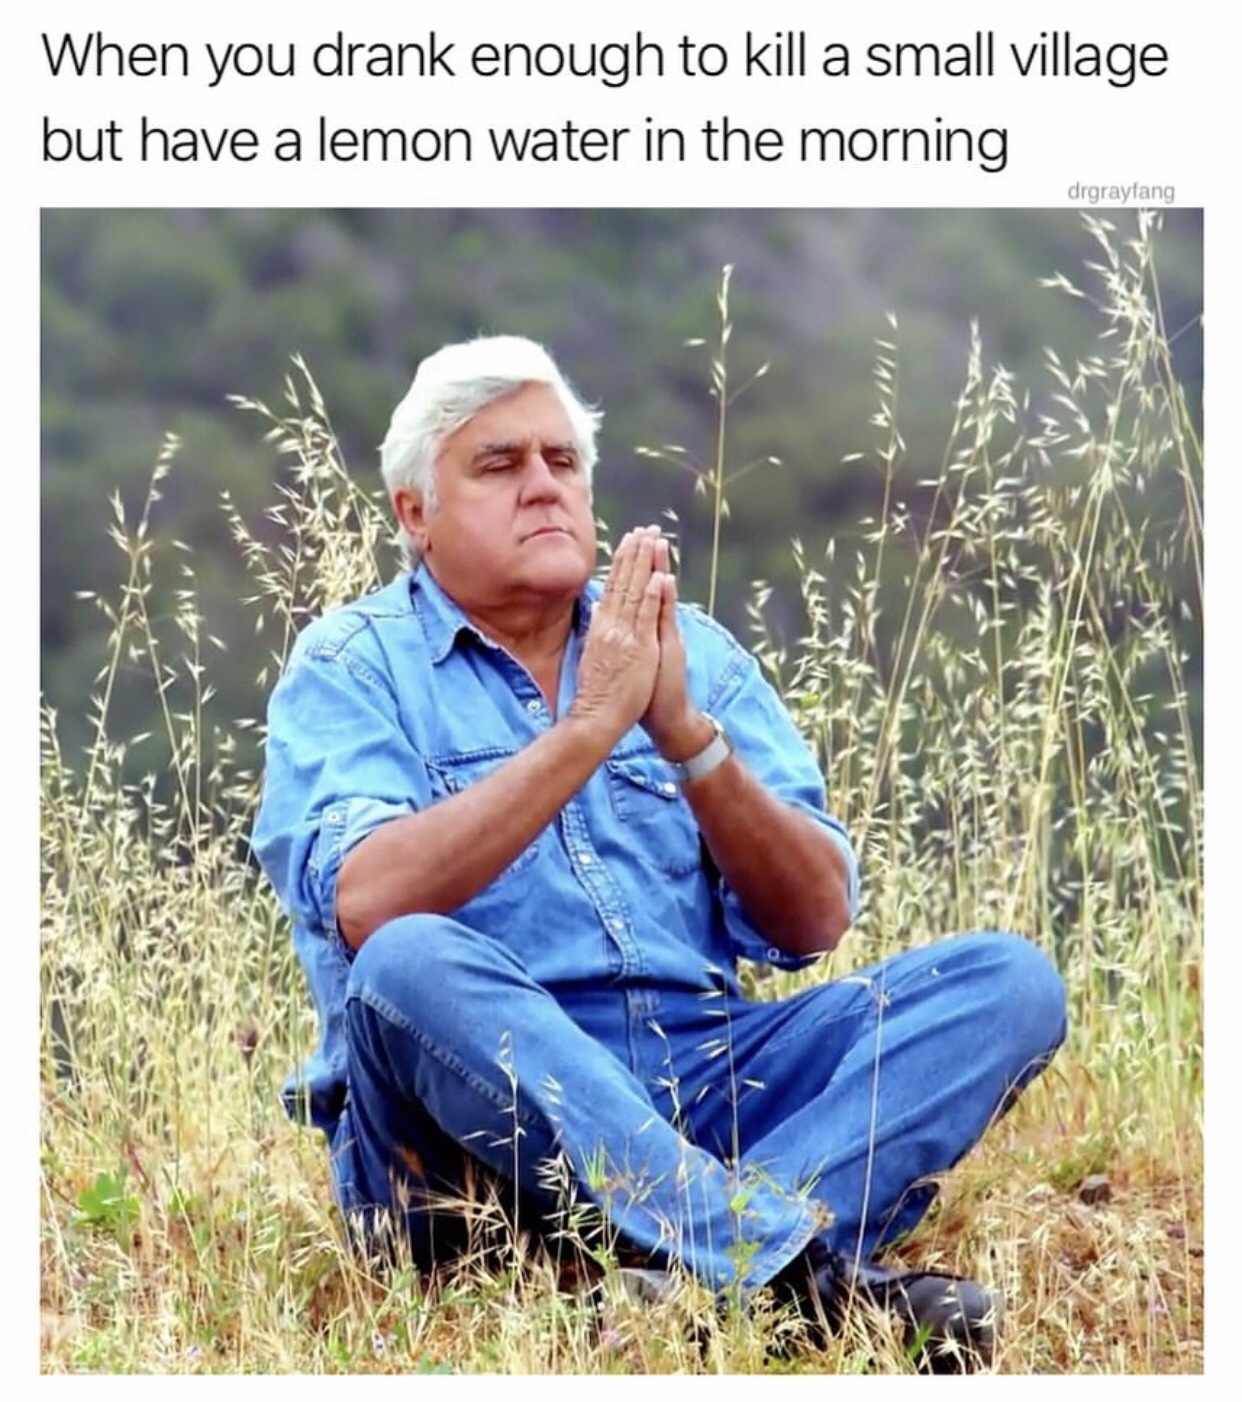 jay leno meditation meme - When you drank enough to kill a small village but have a lemon water in the morning daryland